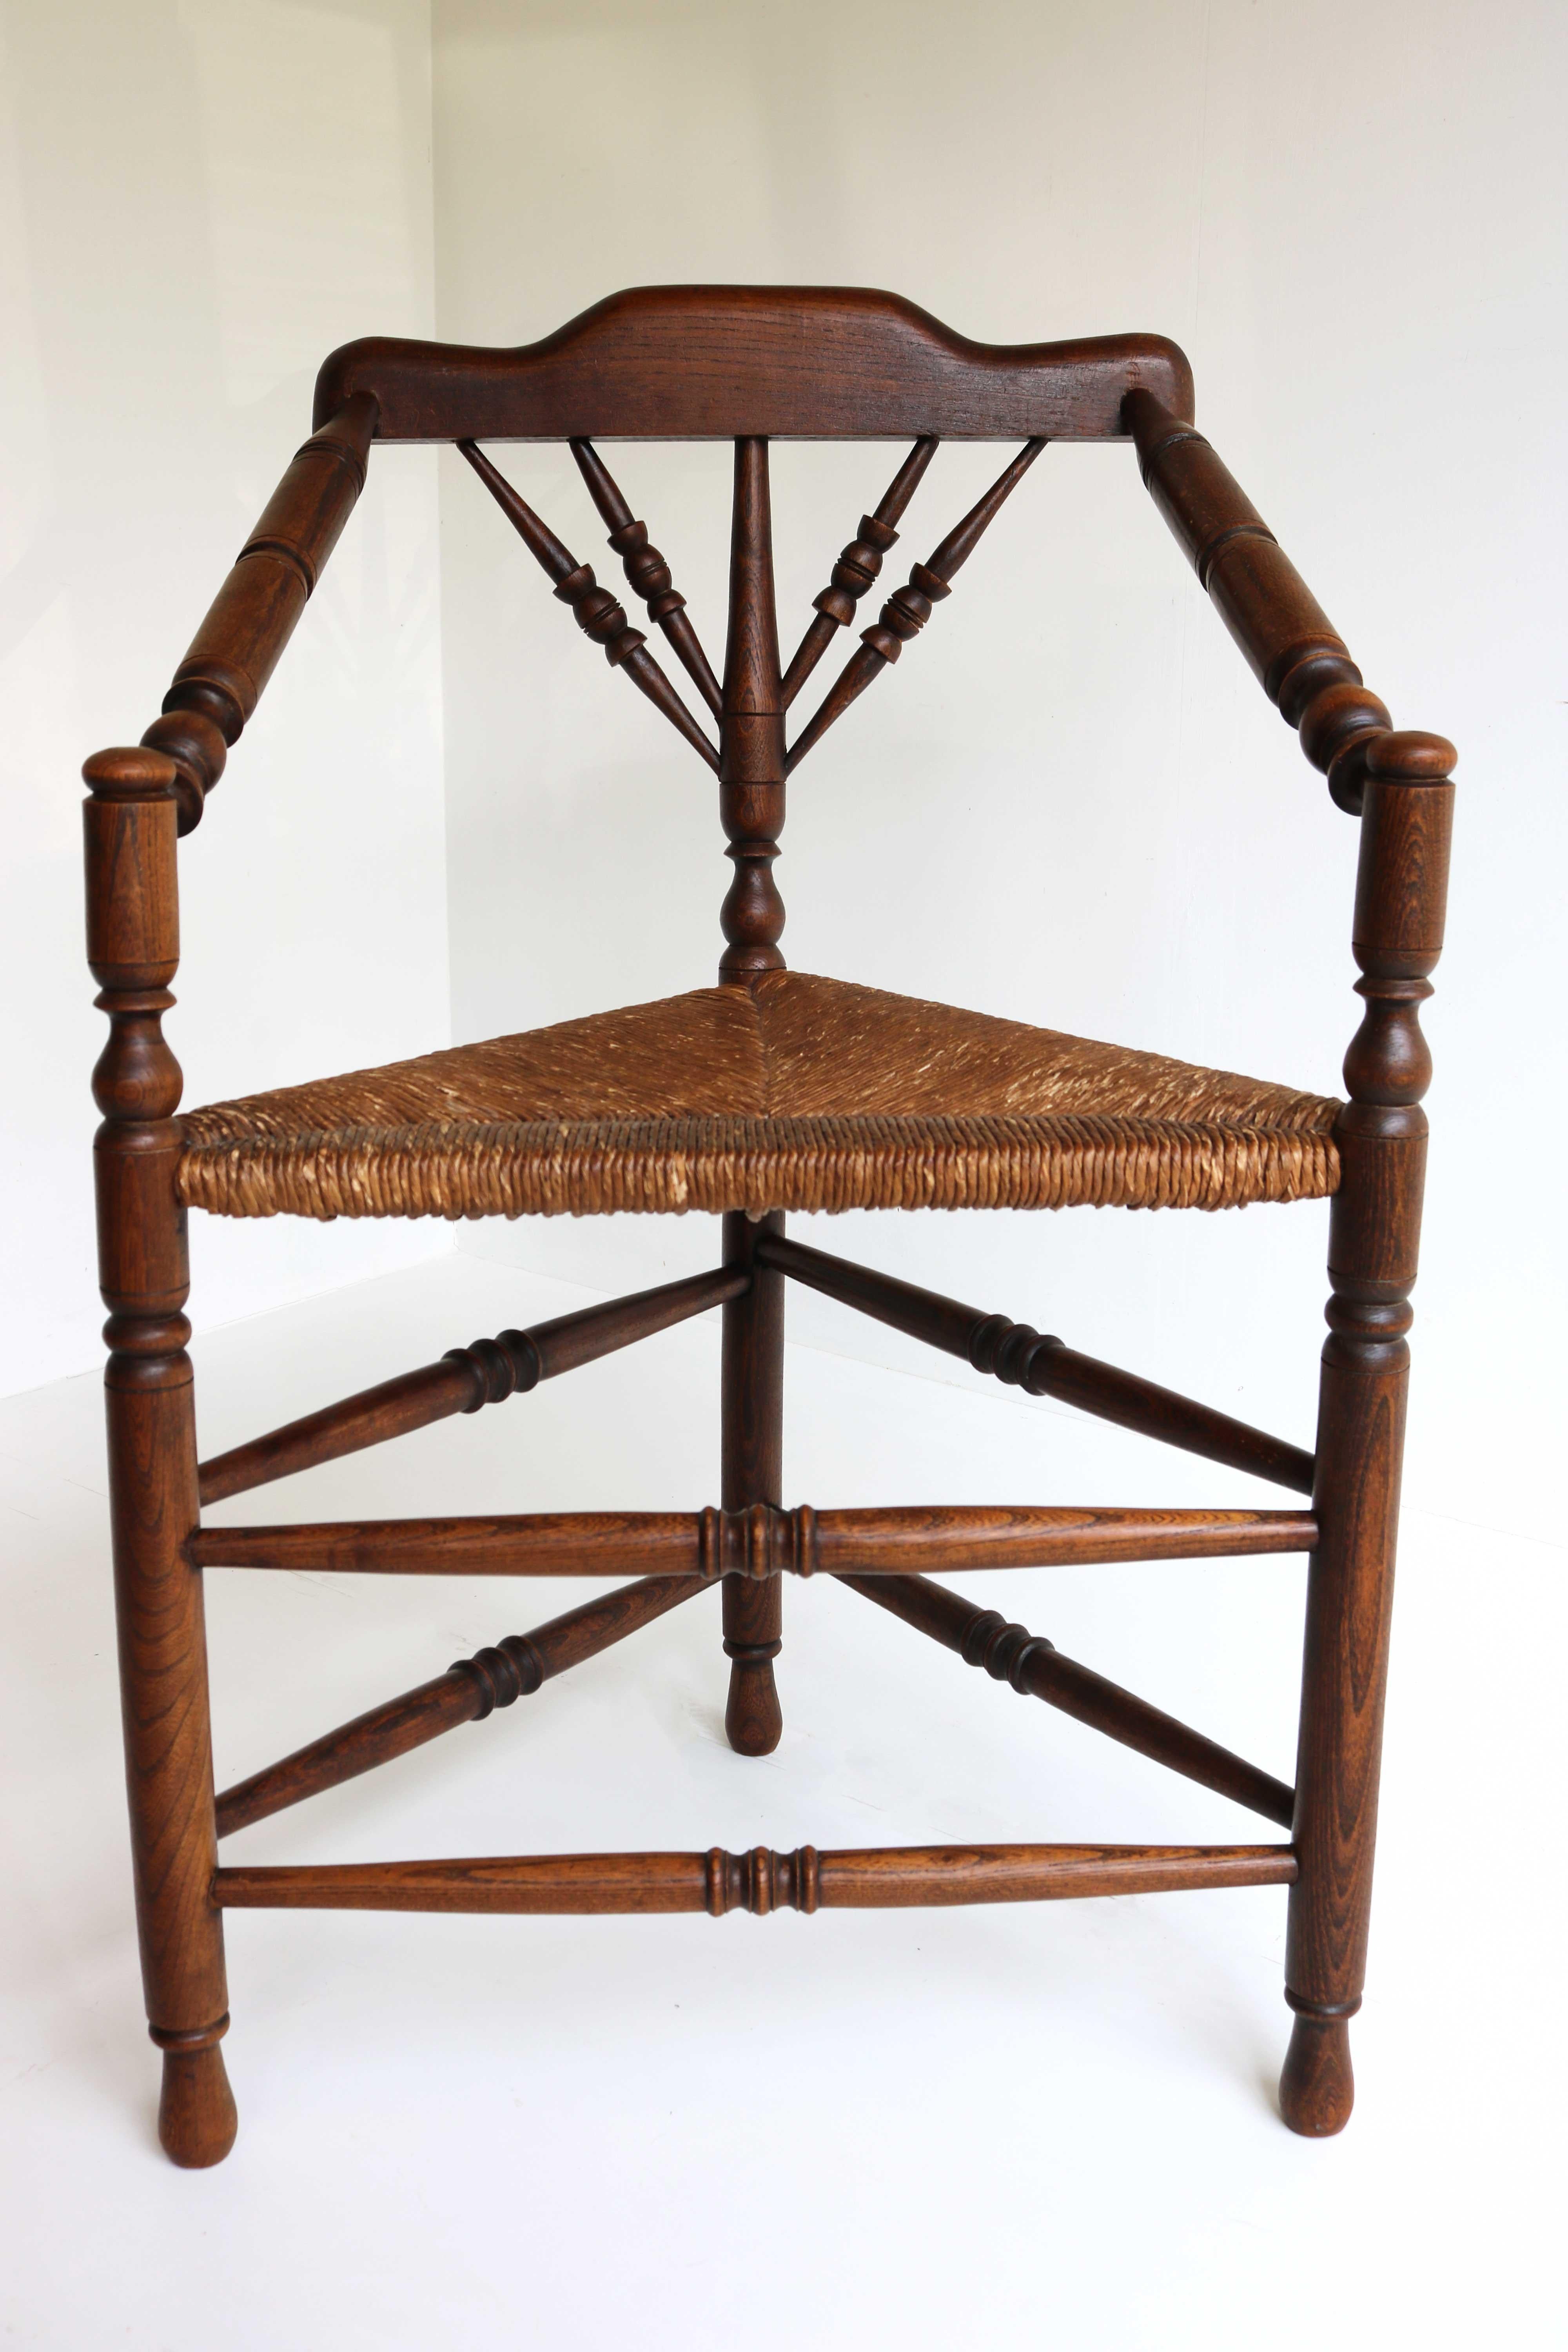 Antique Edwardian Style Triangular Corner Chair Rush Seat Knitting Armchair 1900 For Sale 7